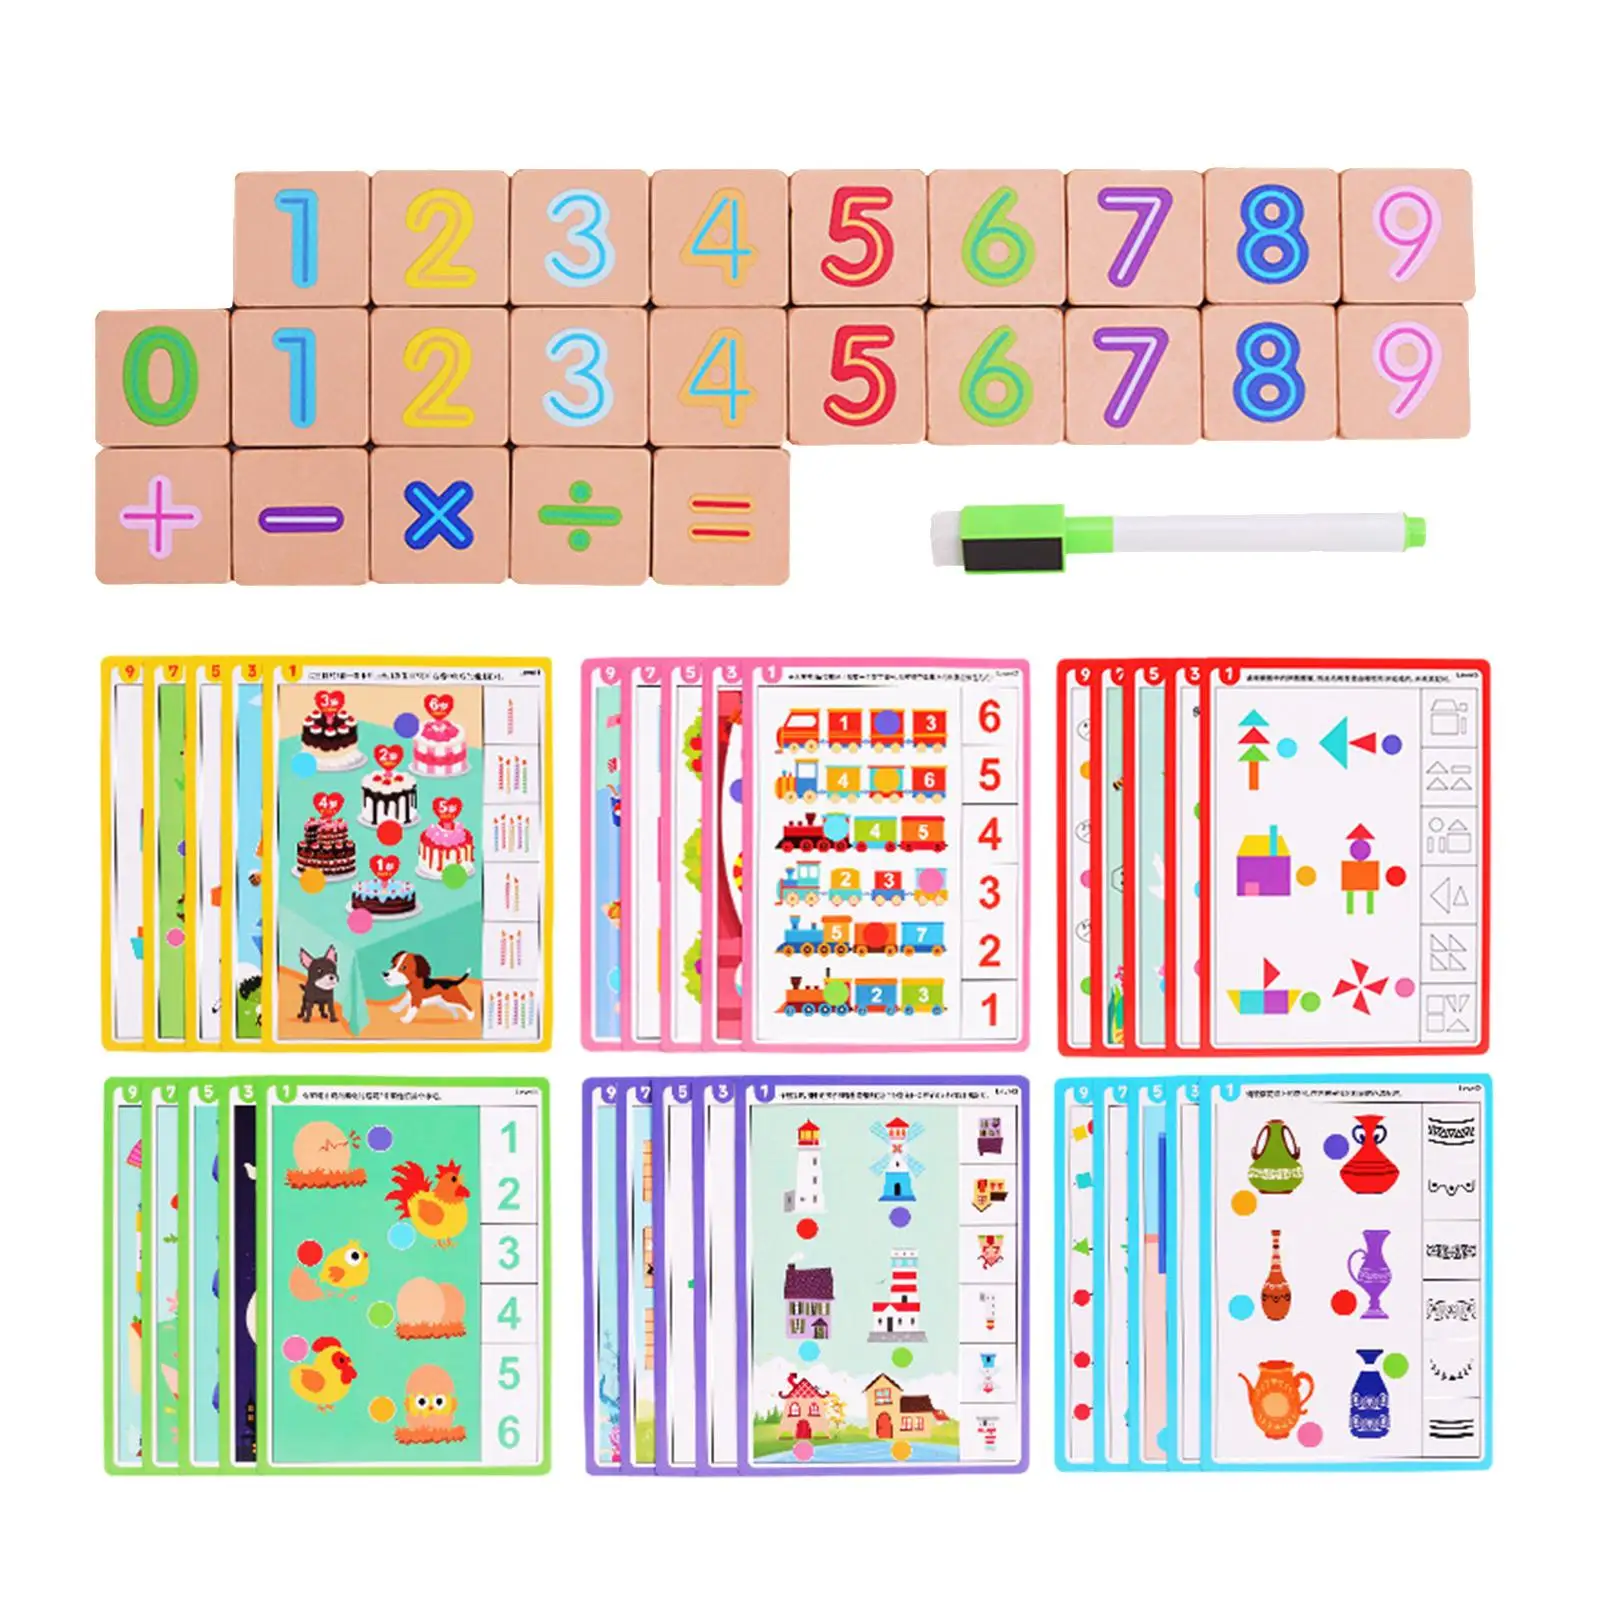 Montessori Learning Toys Slide Puzzle Preschool Educational Toys Color and Shape Matching Brain Teasers Logic Game for Child